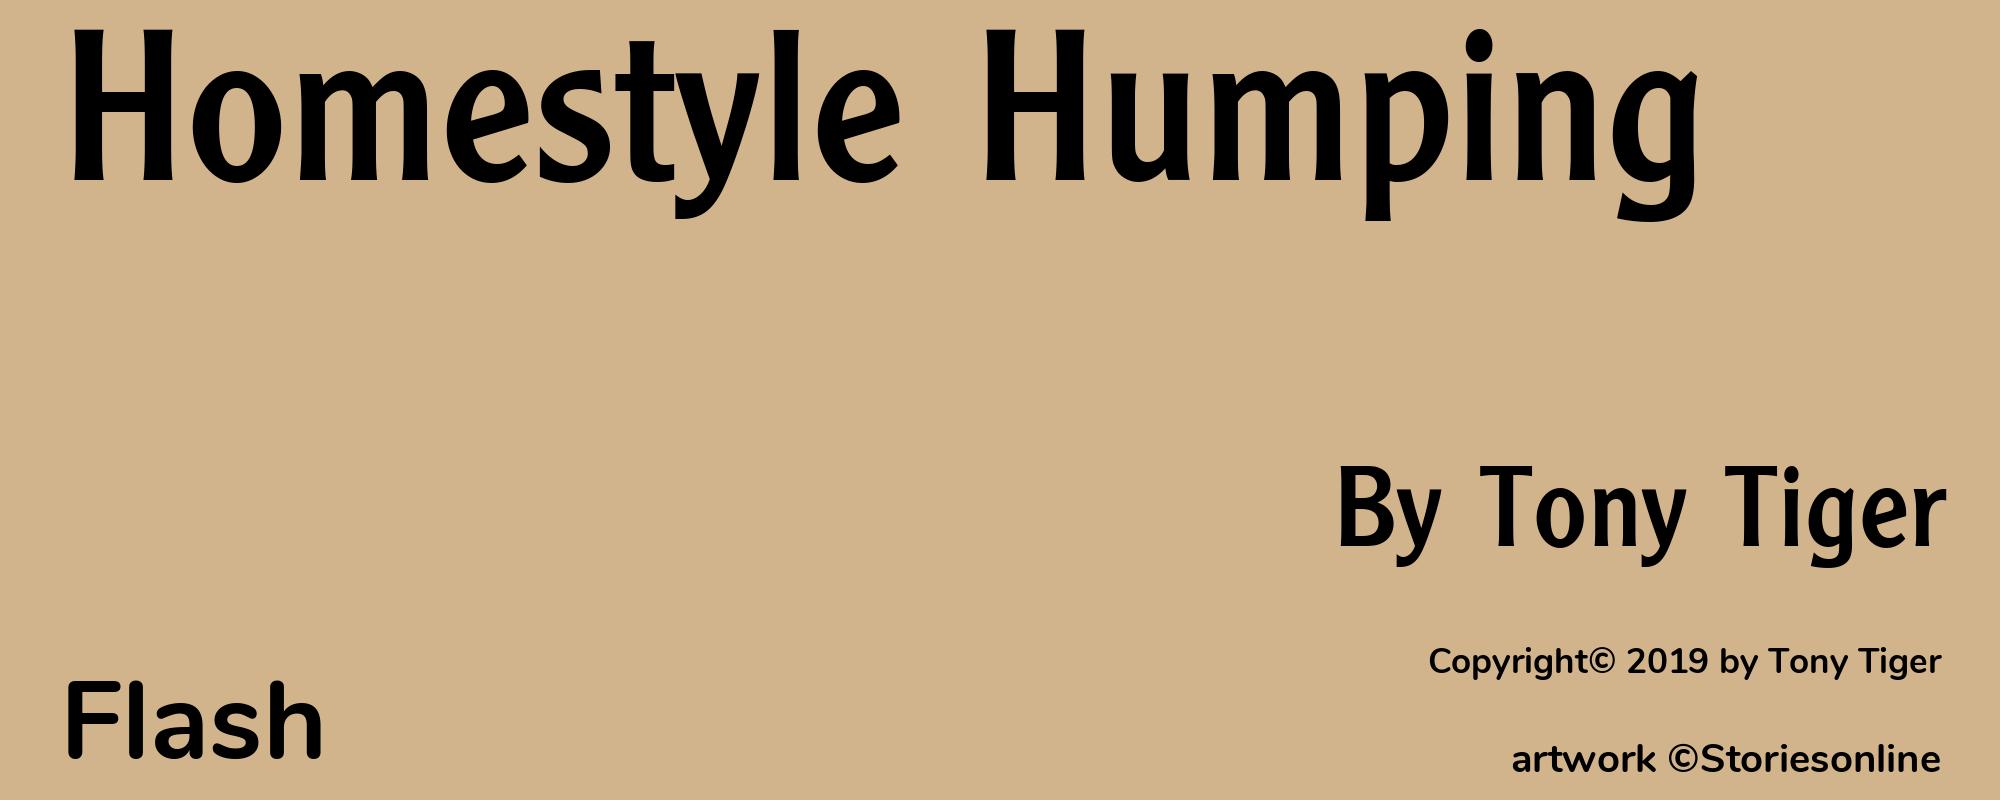 Homestyle Humping - Cover